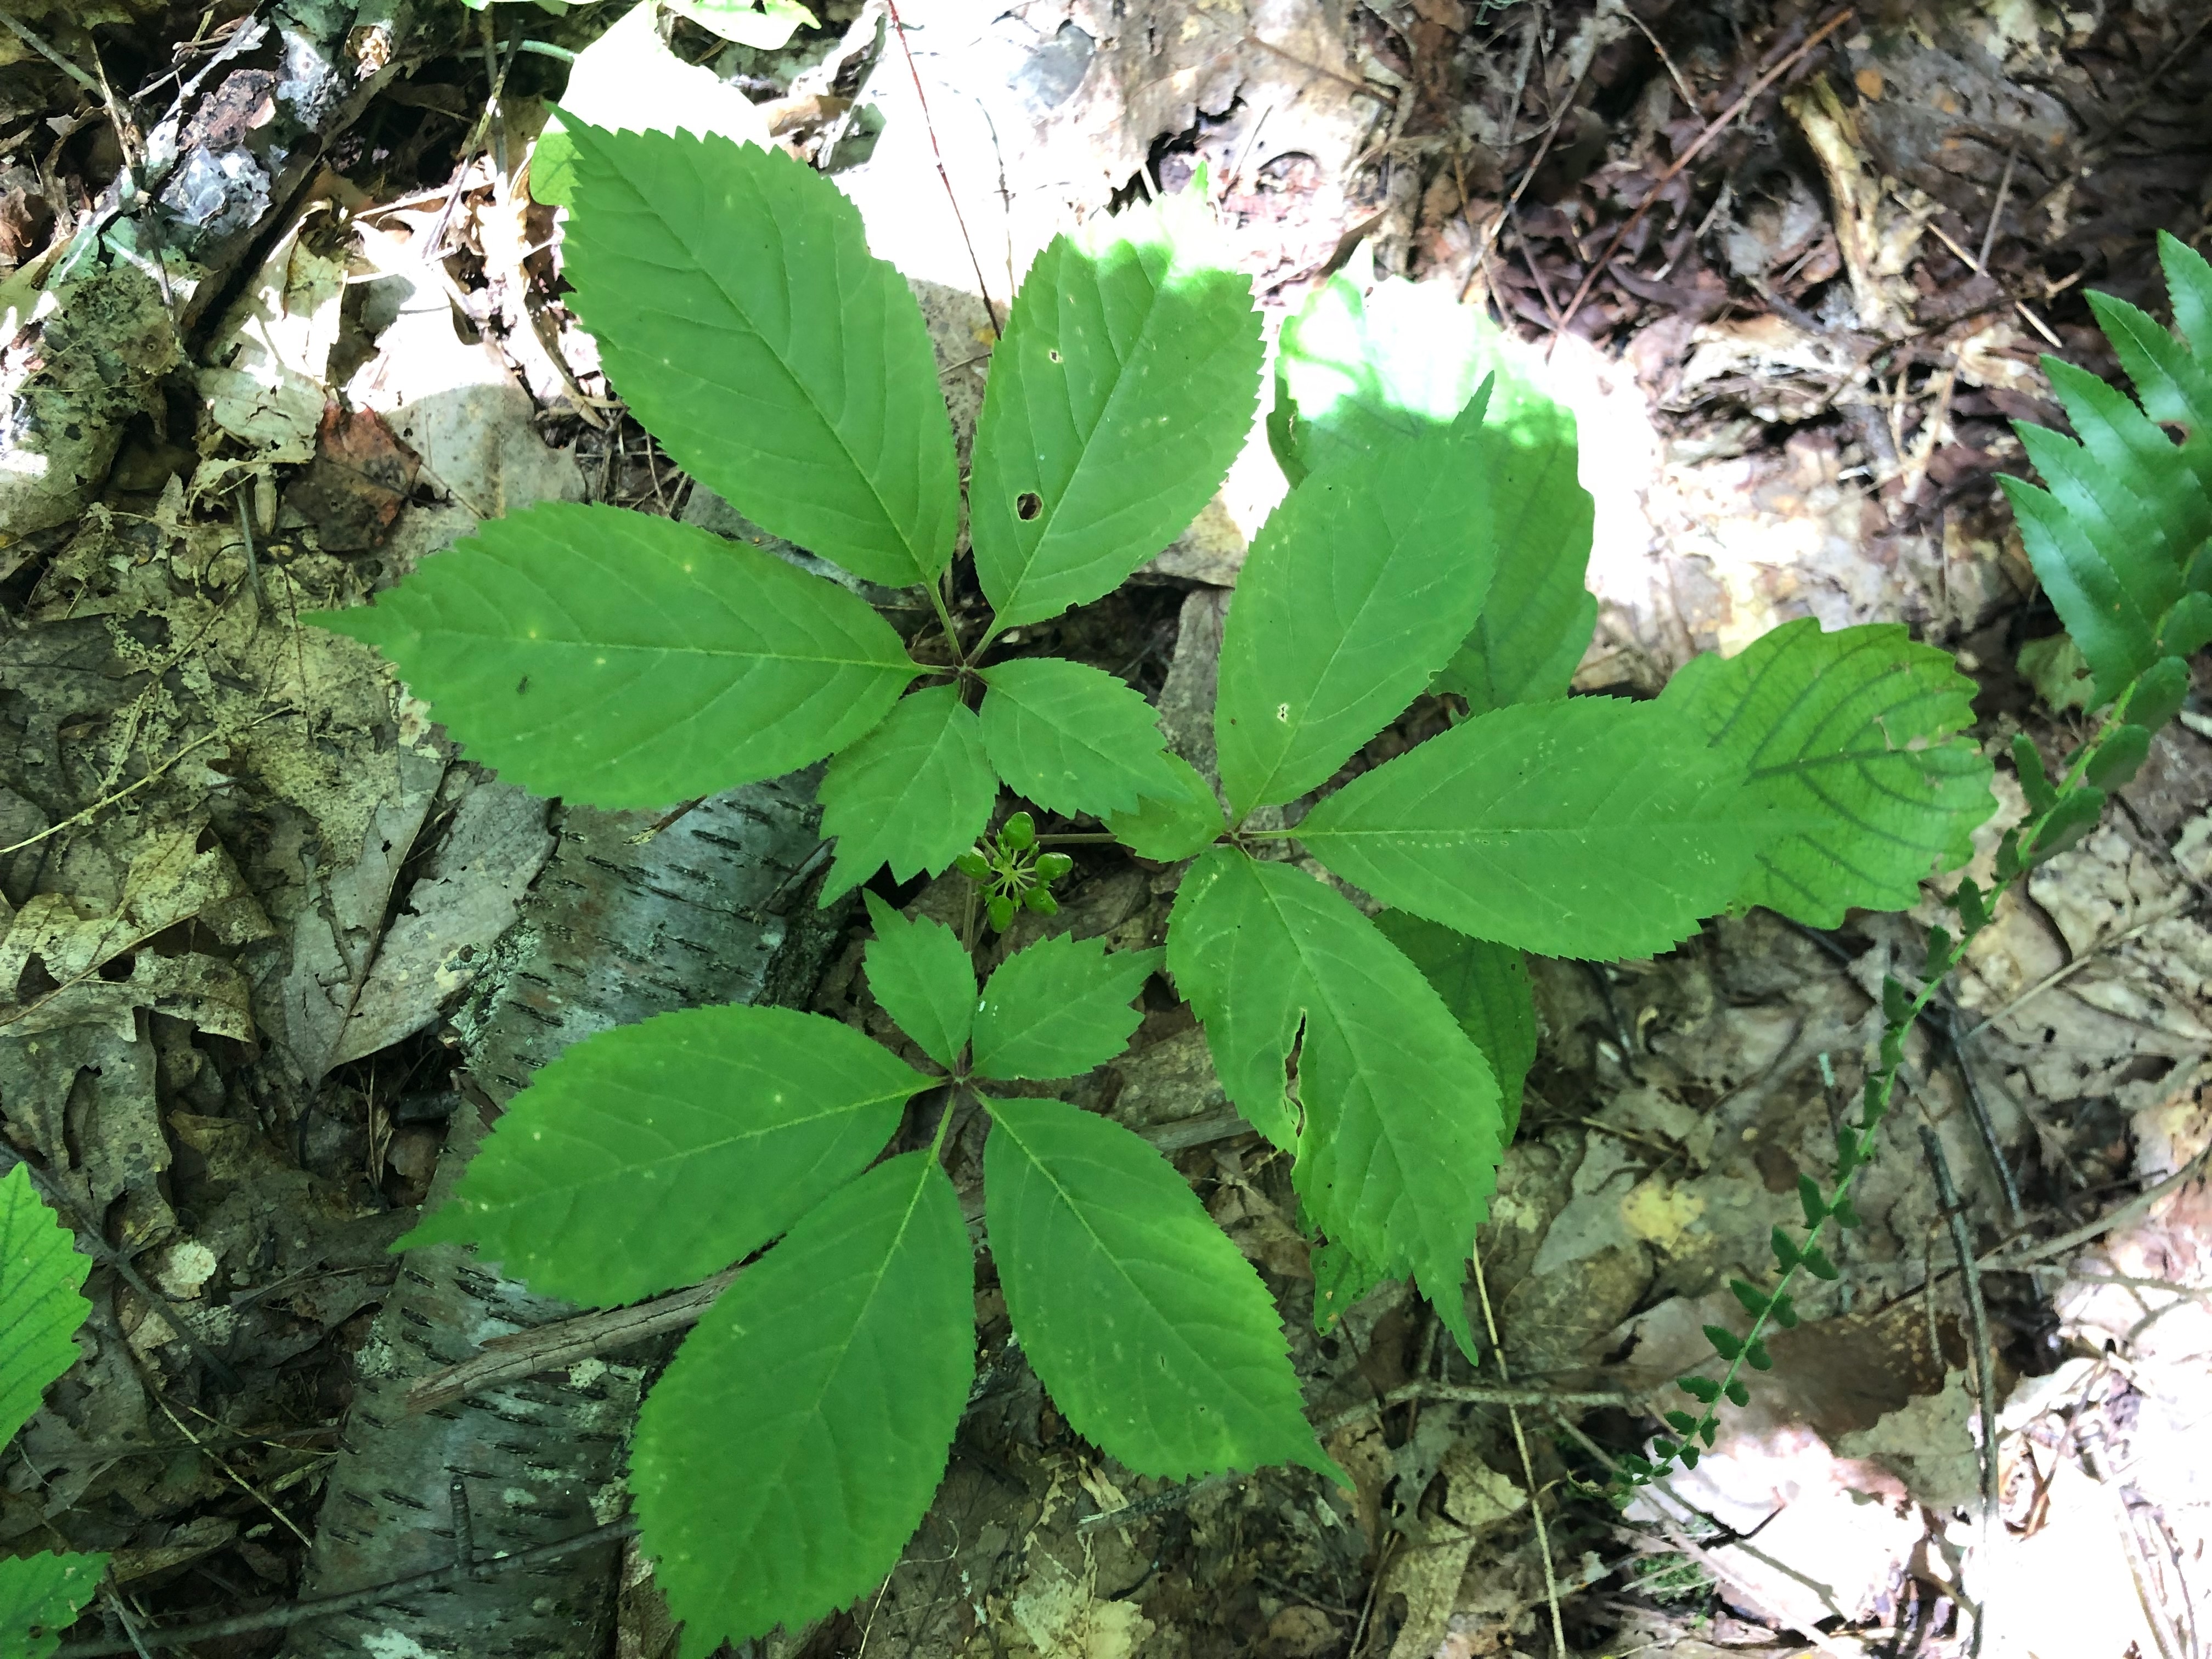 A ginseng plant growing on the forest floor displaying three “prongs,” or leaves with five leaflets each, and unripe green berries.